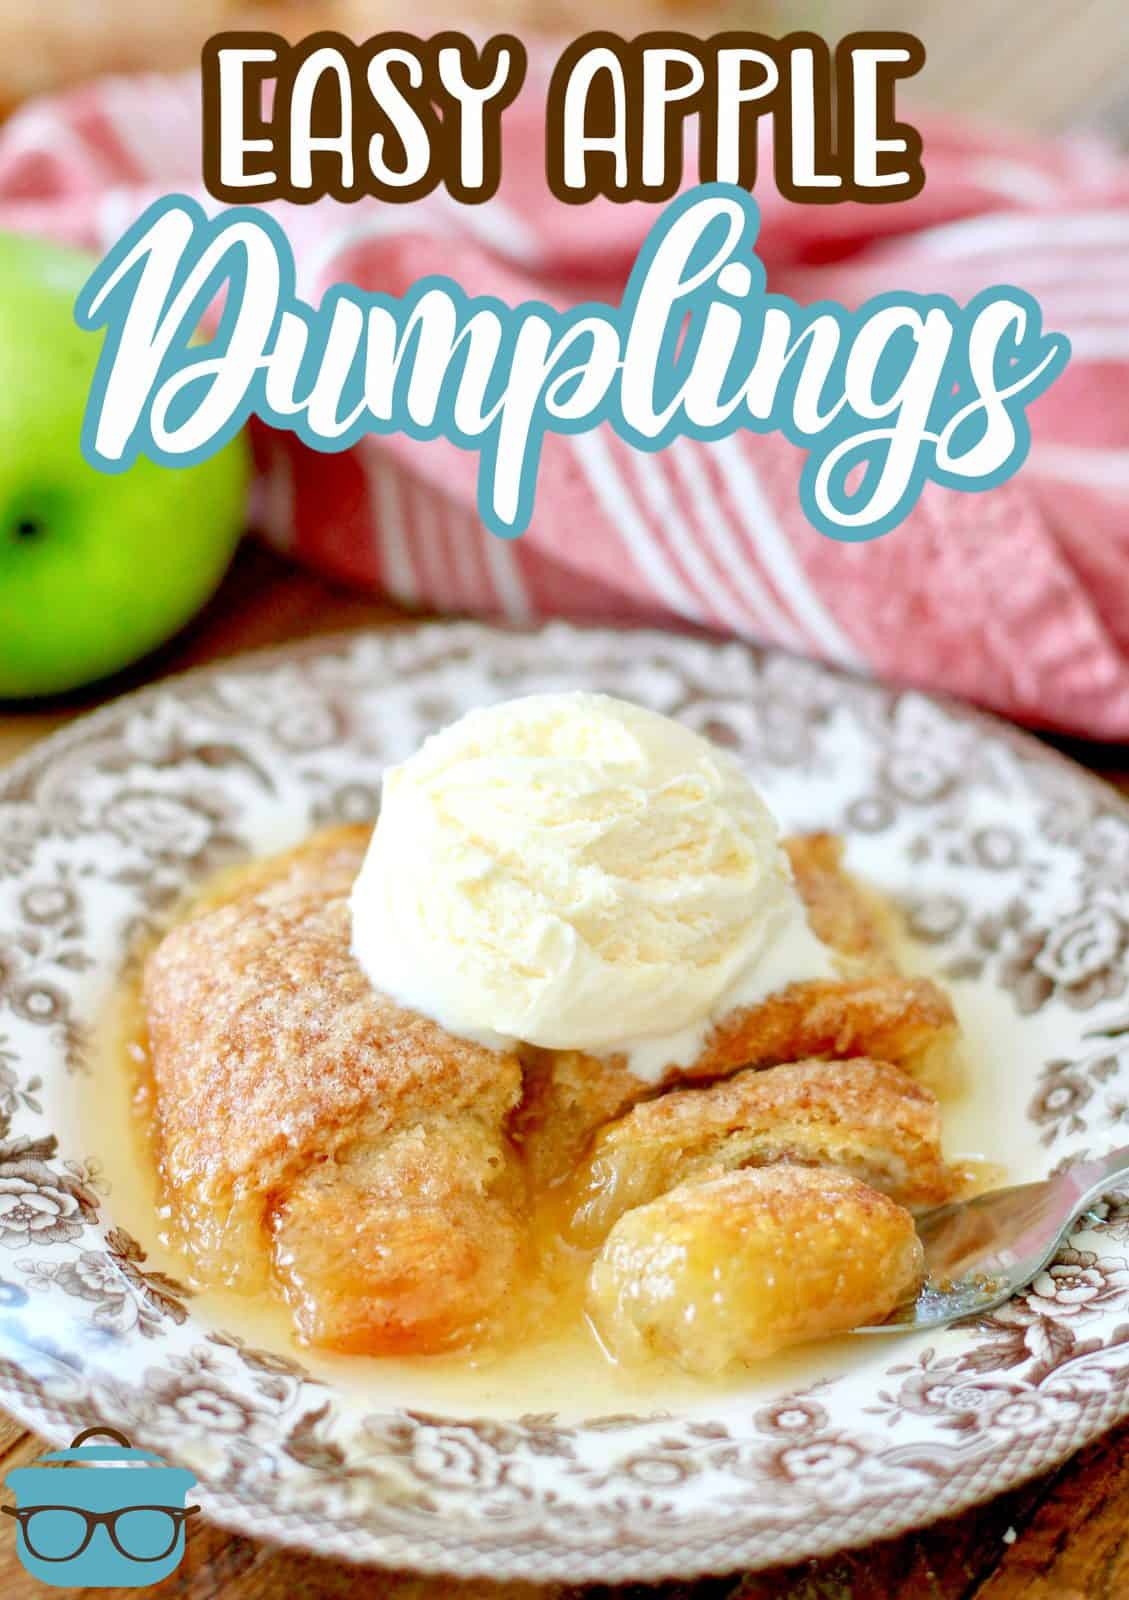 Apple Dumplings recipe from The Country Cook, two dumplings topped with ice cream on a brown and white plate